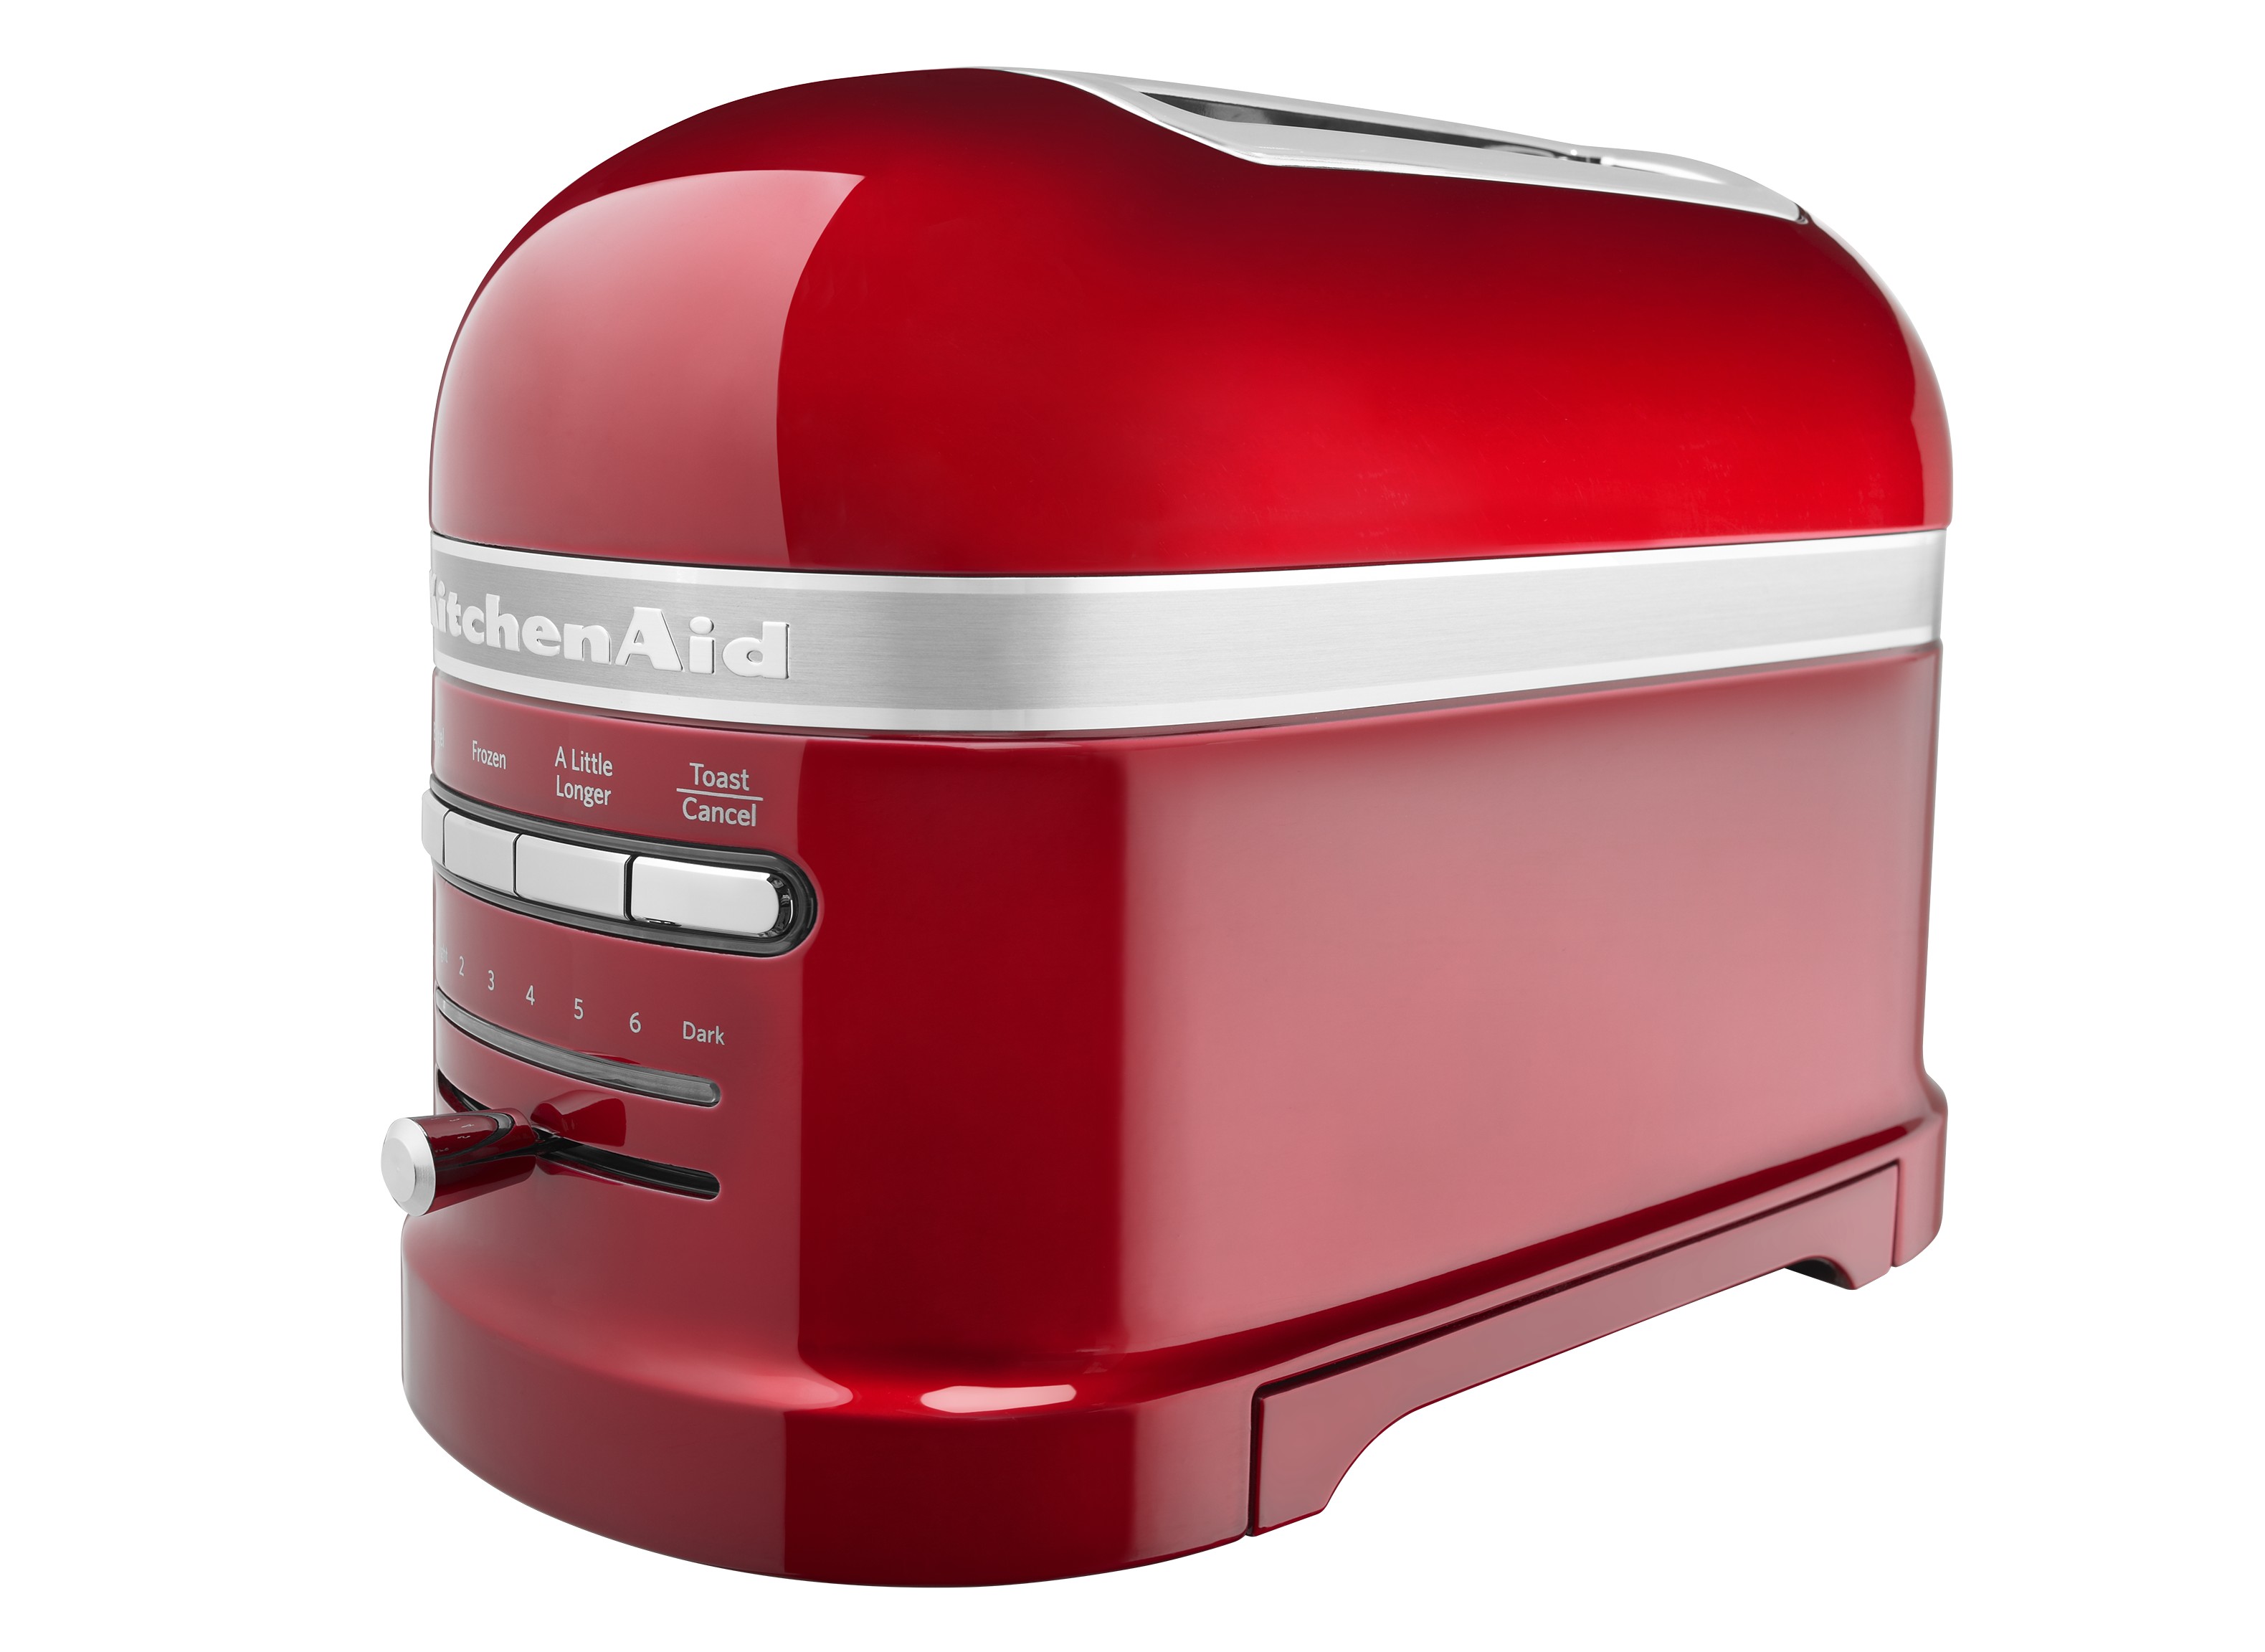 Toaster KitchenAid 5kmt 221 EOB Bread Household appliances for kitchen home  Toasters Cooking Appliance